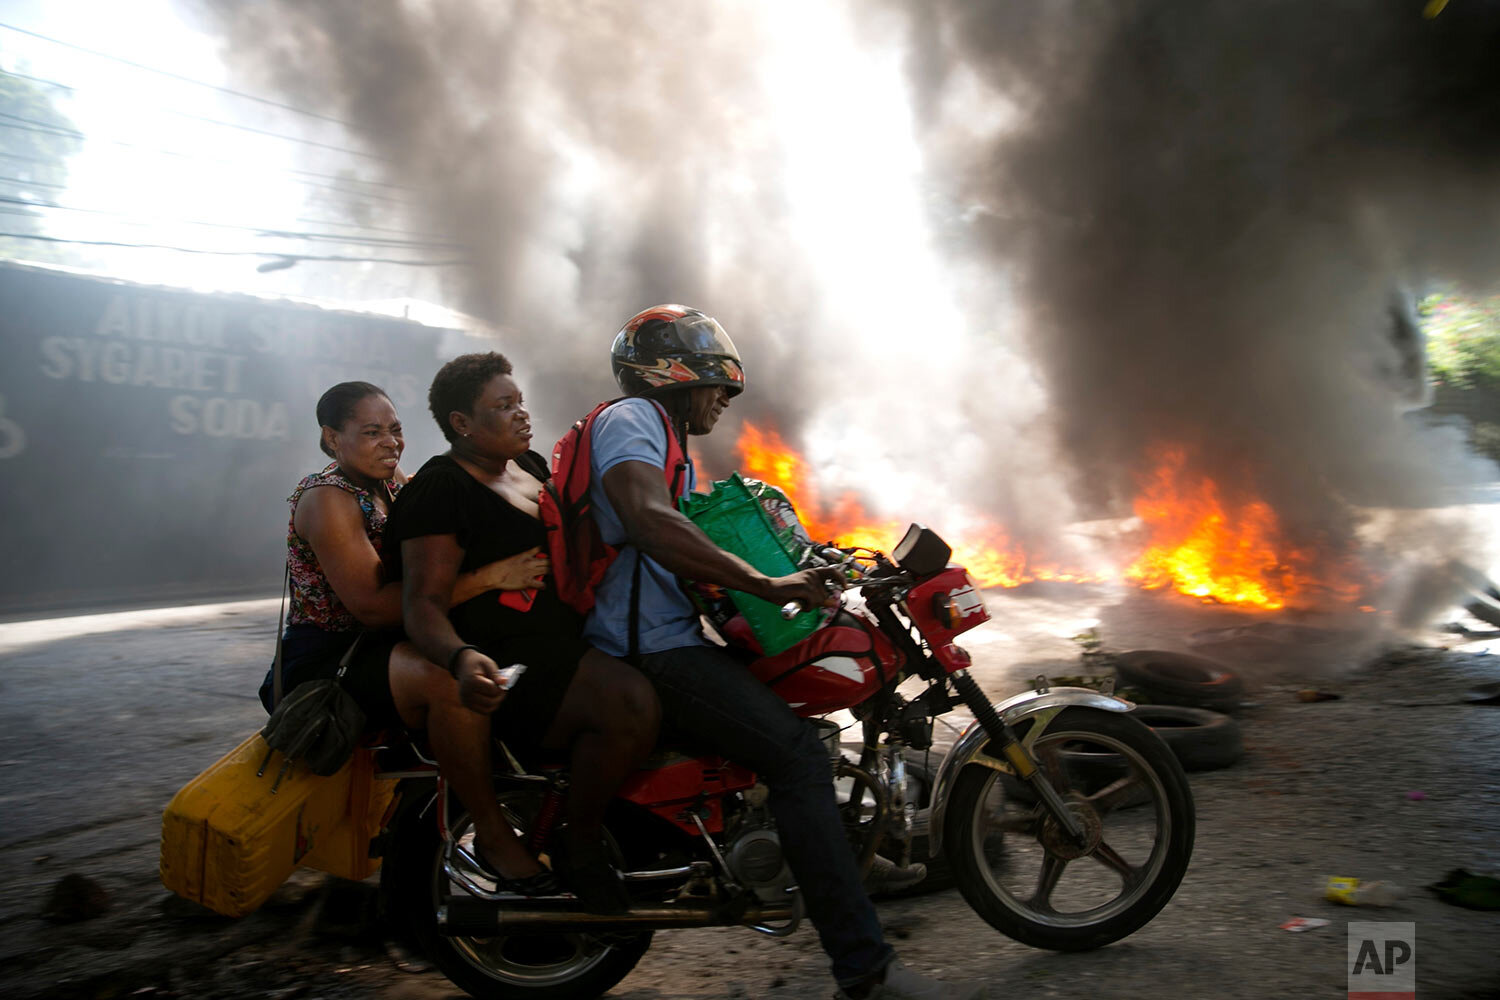  A moto-taxi driver takes two women around a burning barricade set up by people protesting fuel shortages in Petion-ville, Haiti, Sunday, Sept. 15, 2019. Gas stations have been reducing their operating hours over the past weeks, and the majority were